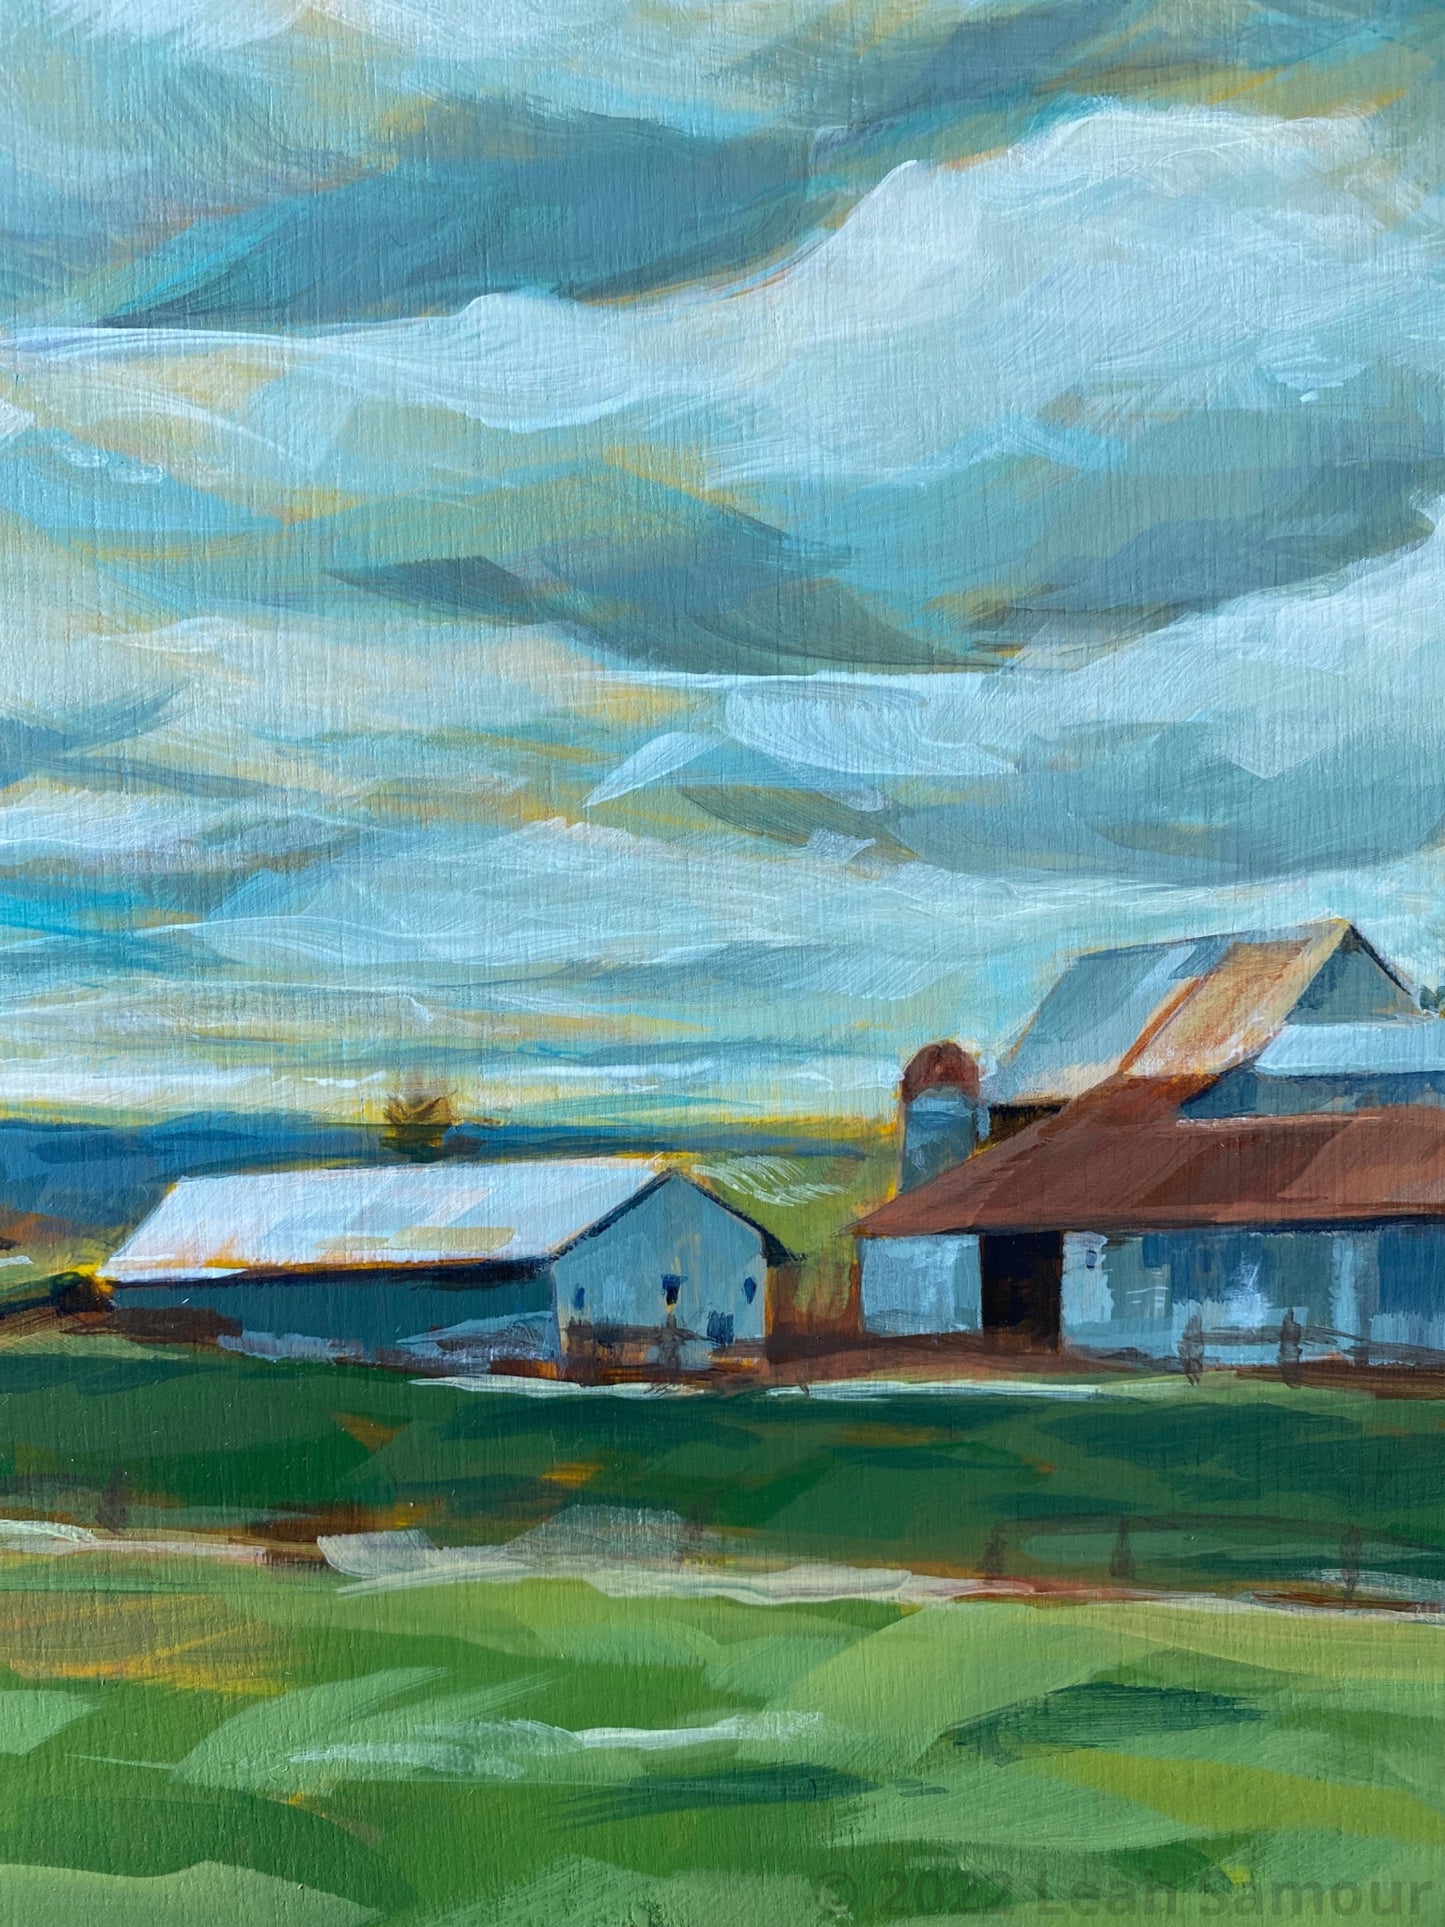 Close up of 9x12 original framed art for sale featuring a Barn On The Way To Beach Acrylic Painting Wood Panel